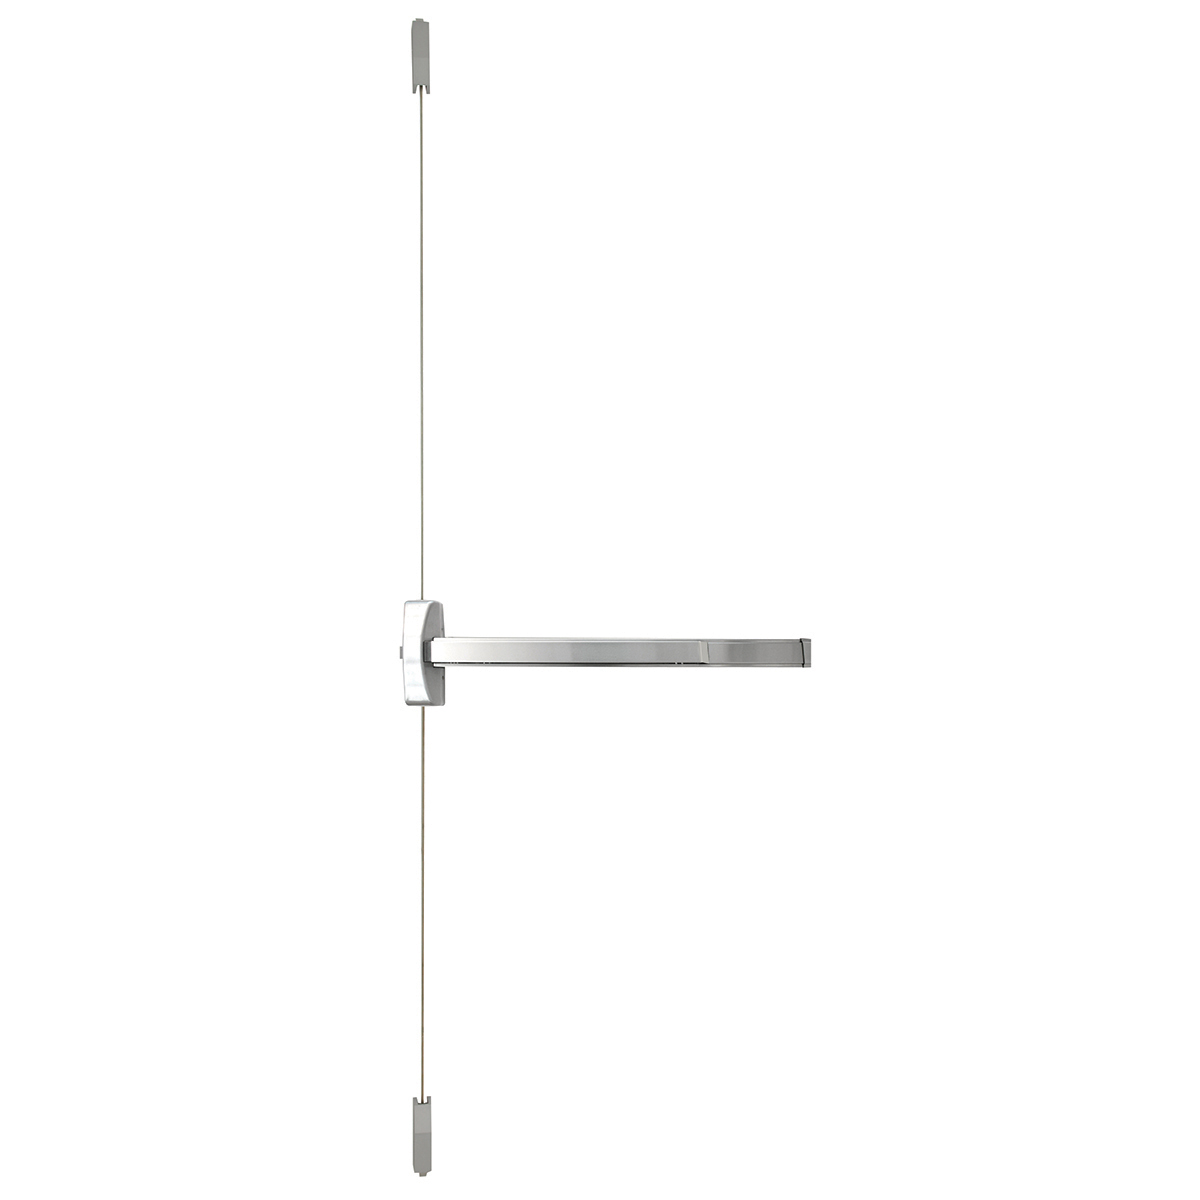 9700 Series - Safety Rated Vertical Rod Exit Device - 28" - 36" - Stainless Steel